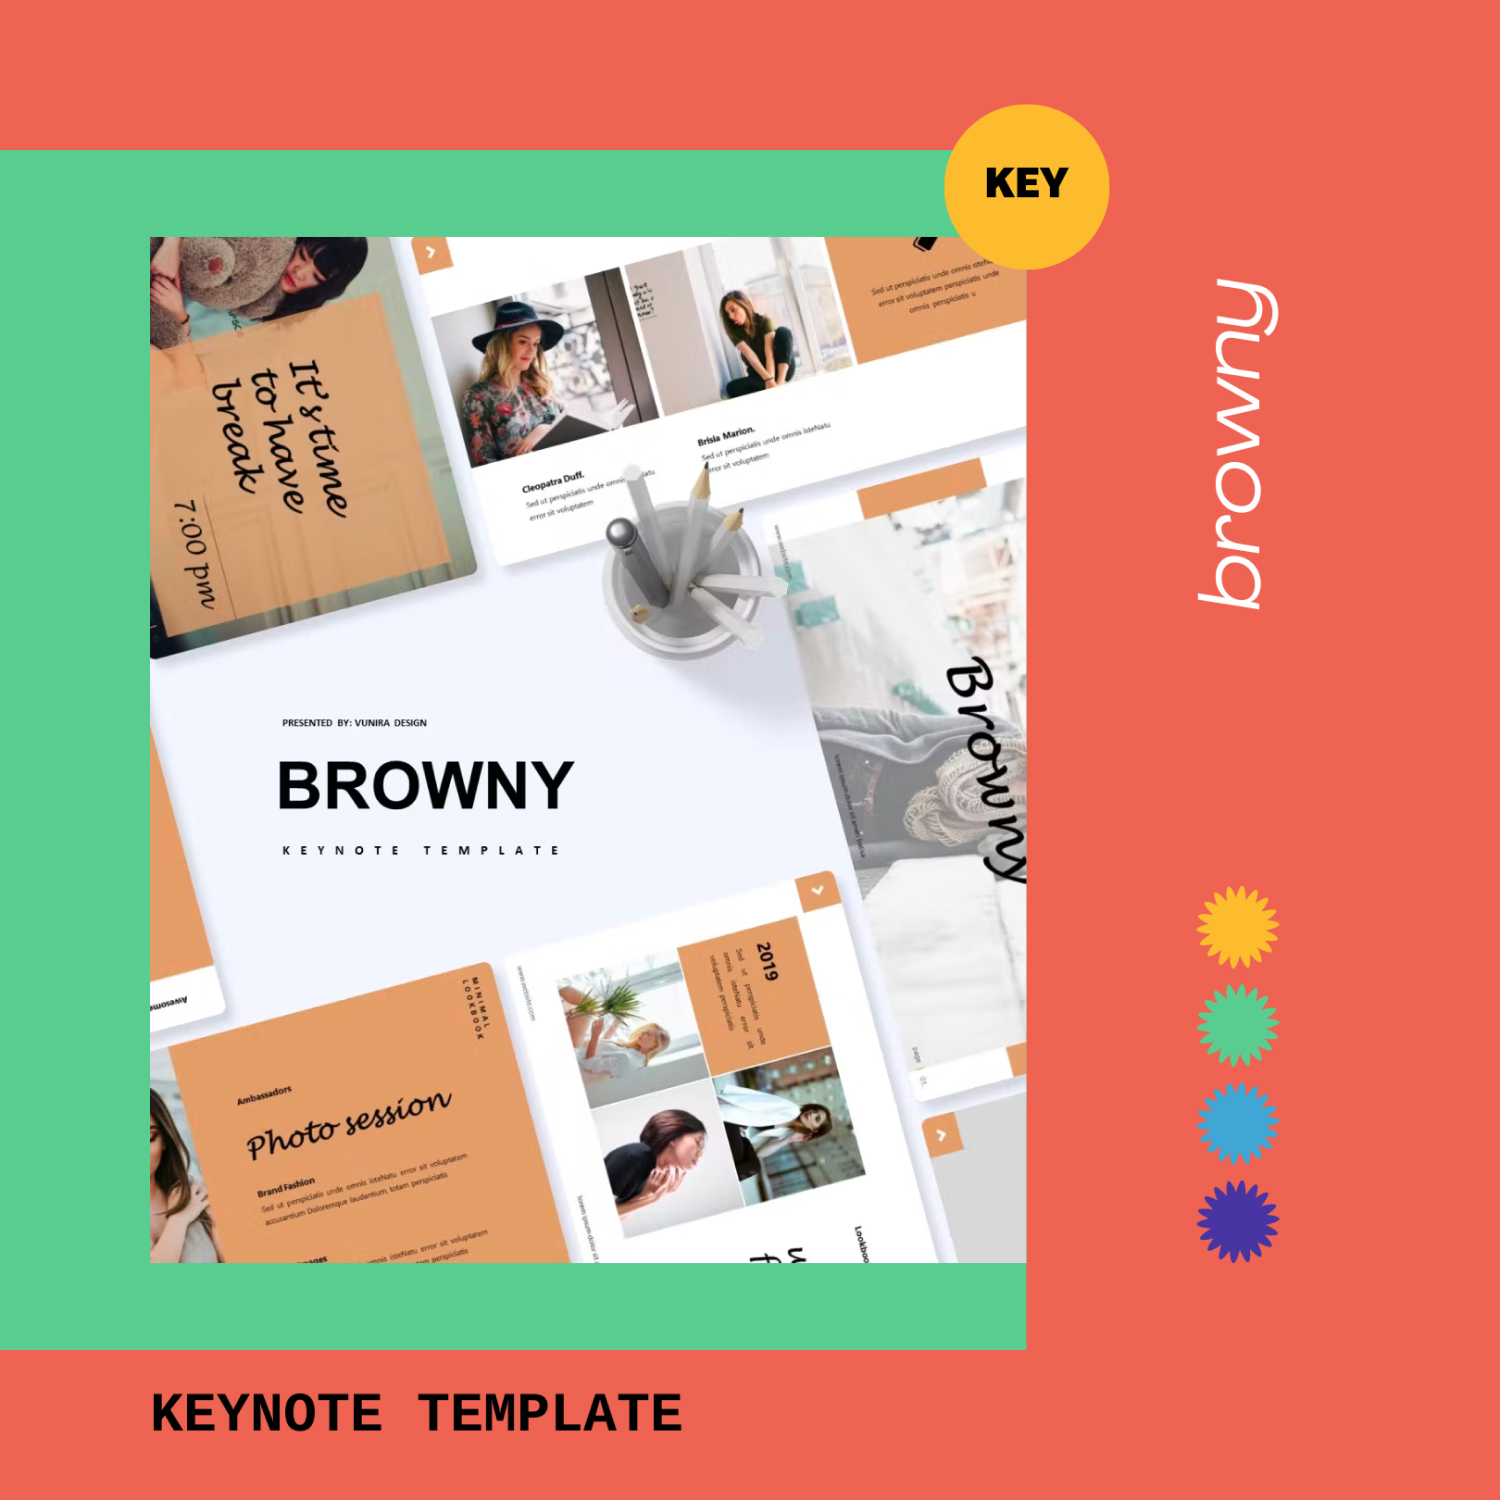 Images preview browny keynote template.